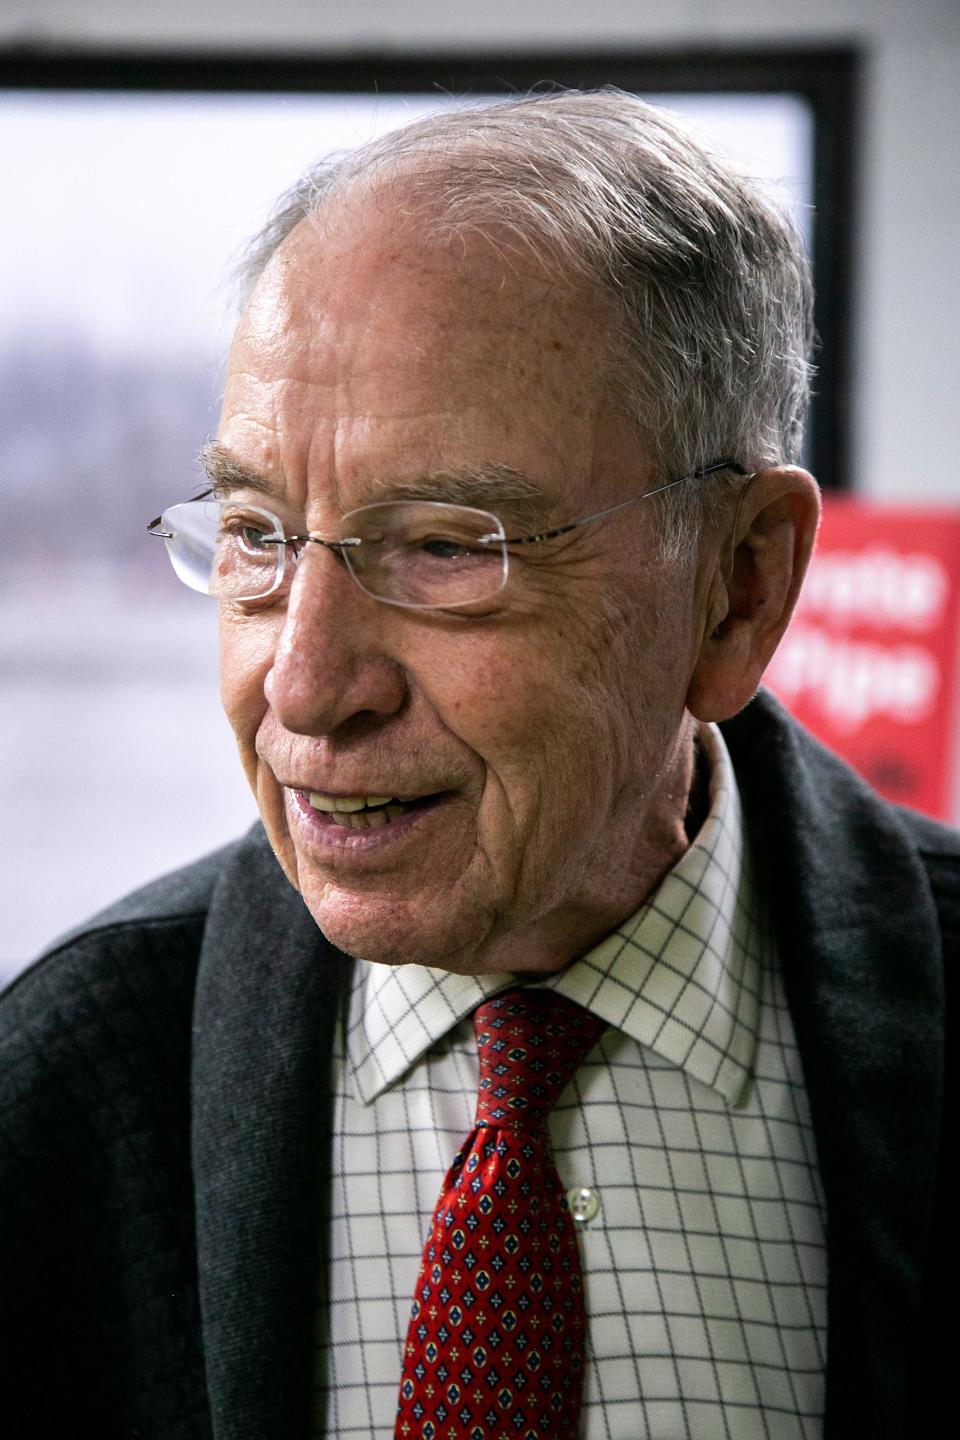 U.S. Sen. Chuck Grassley, R-Iowa, speaks with journalists after going on a tour, Friday, April 22, 2022, at the County Materials Corp. in Iowa City.